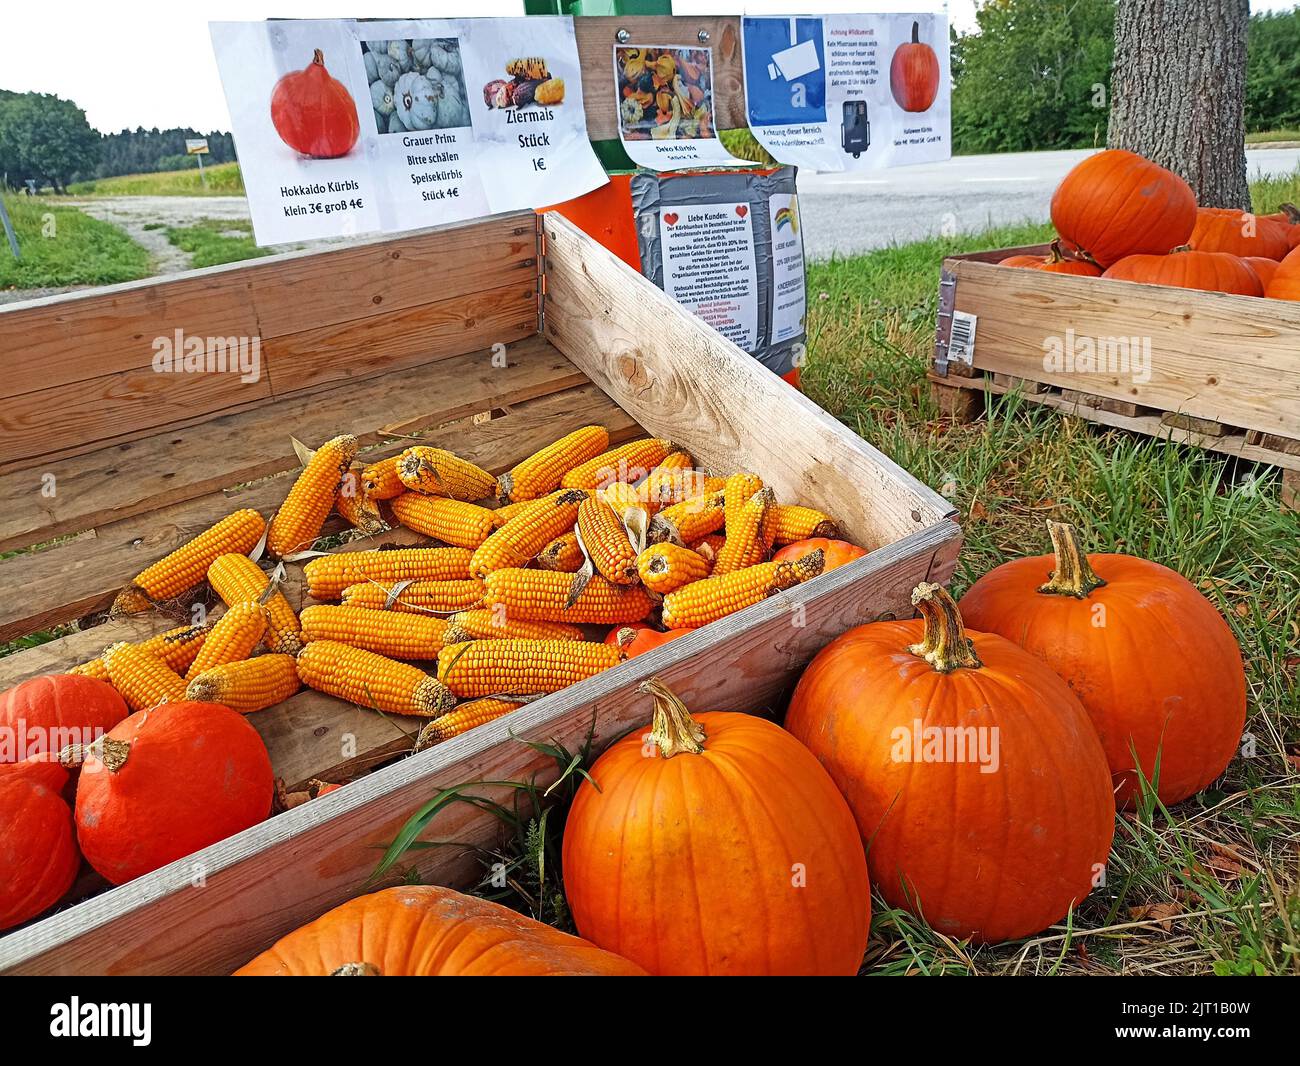 Rathsmannsdorf, Bavaria, Germany - August 27, 2022: German farmers often sell their crops along the roads. At the same time, everyone can choose the vegetable he likes and pay for it by simply putting money into a piggy bank. The picture shows a cart with pumpkins and corn in Lower Bavaria. Stock Photo